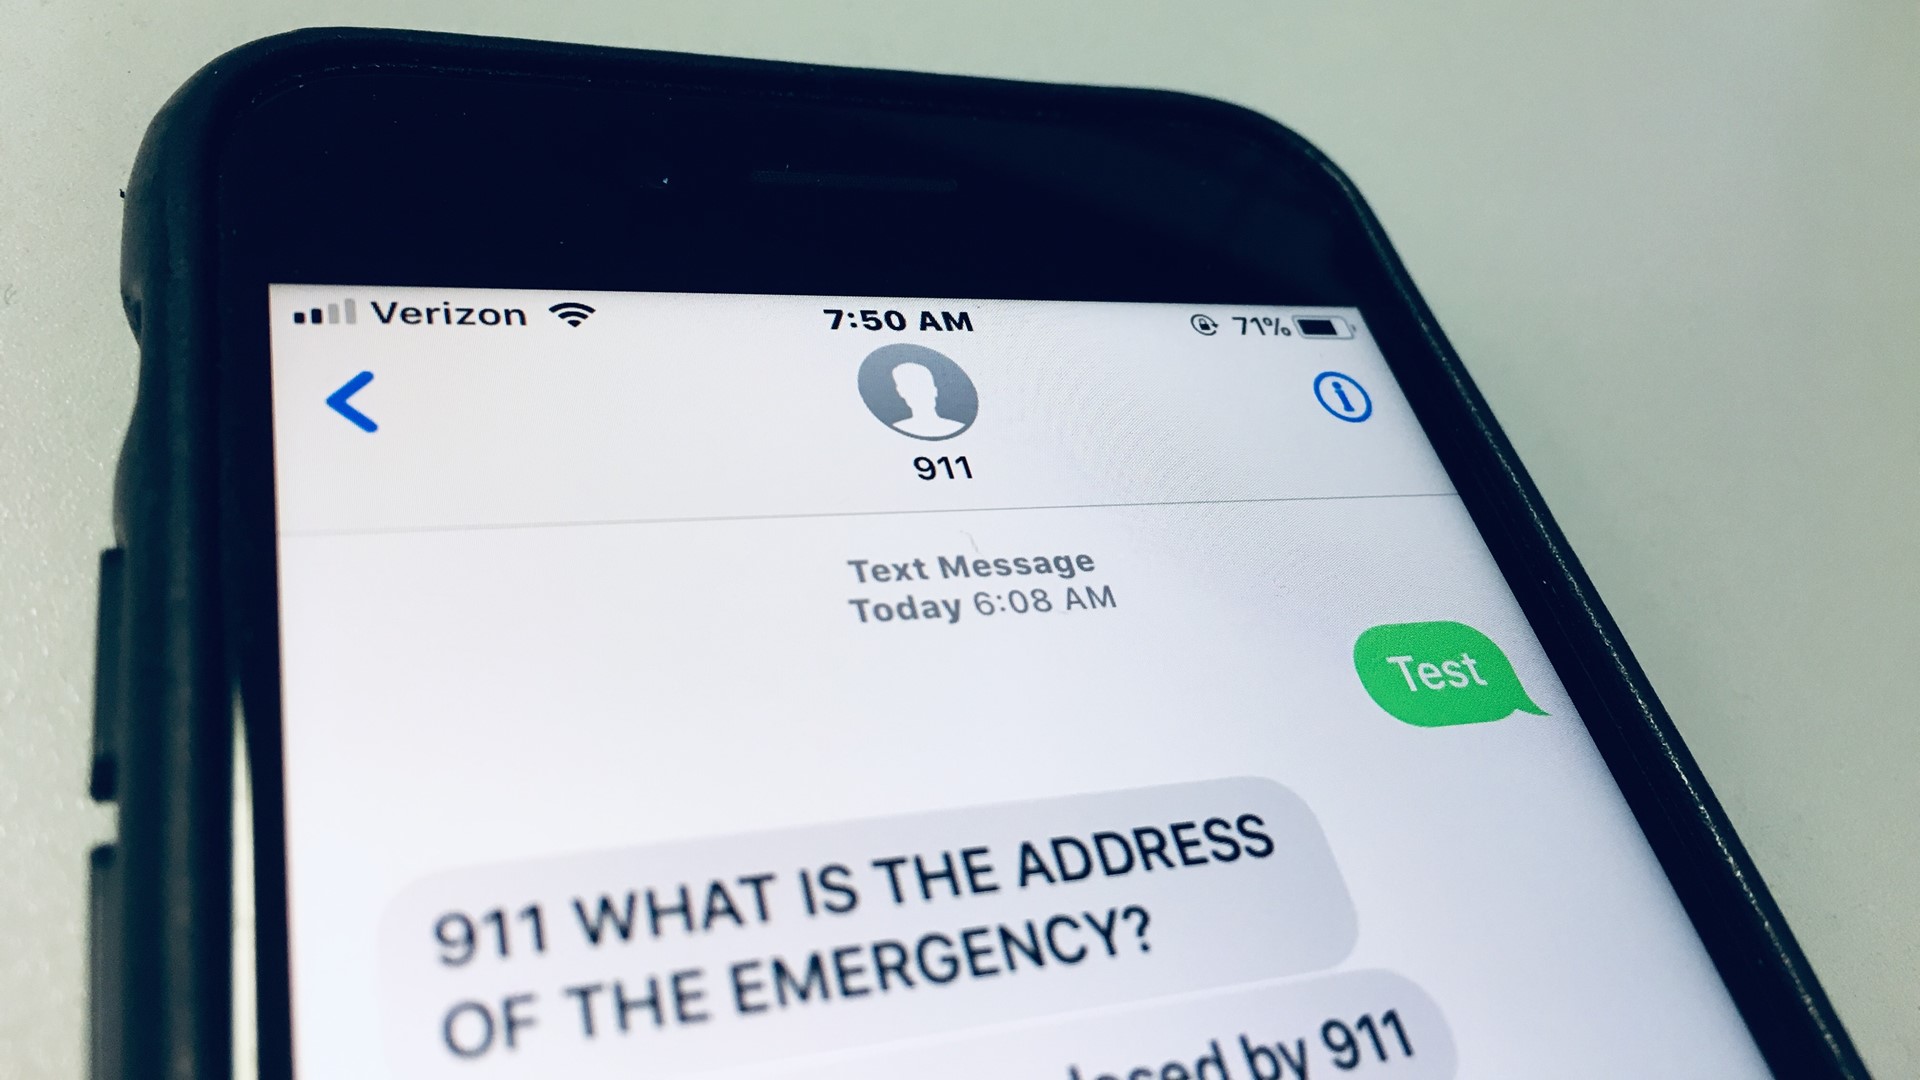 911 texting service now available throughout the entire state of Maine